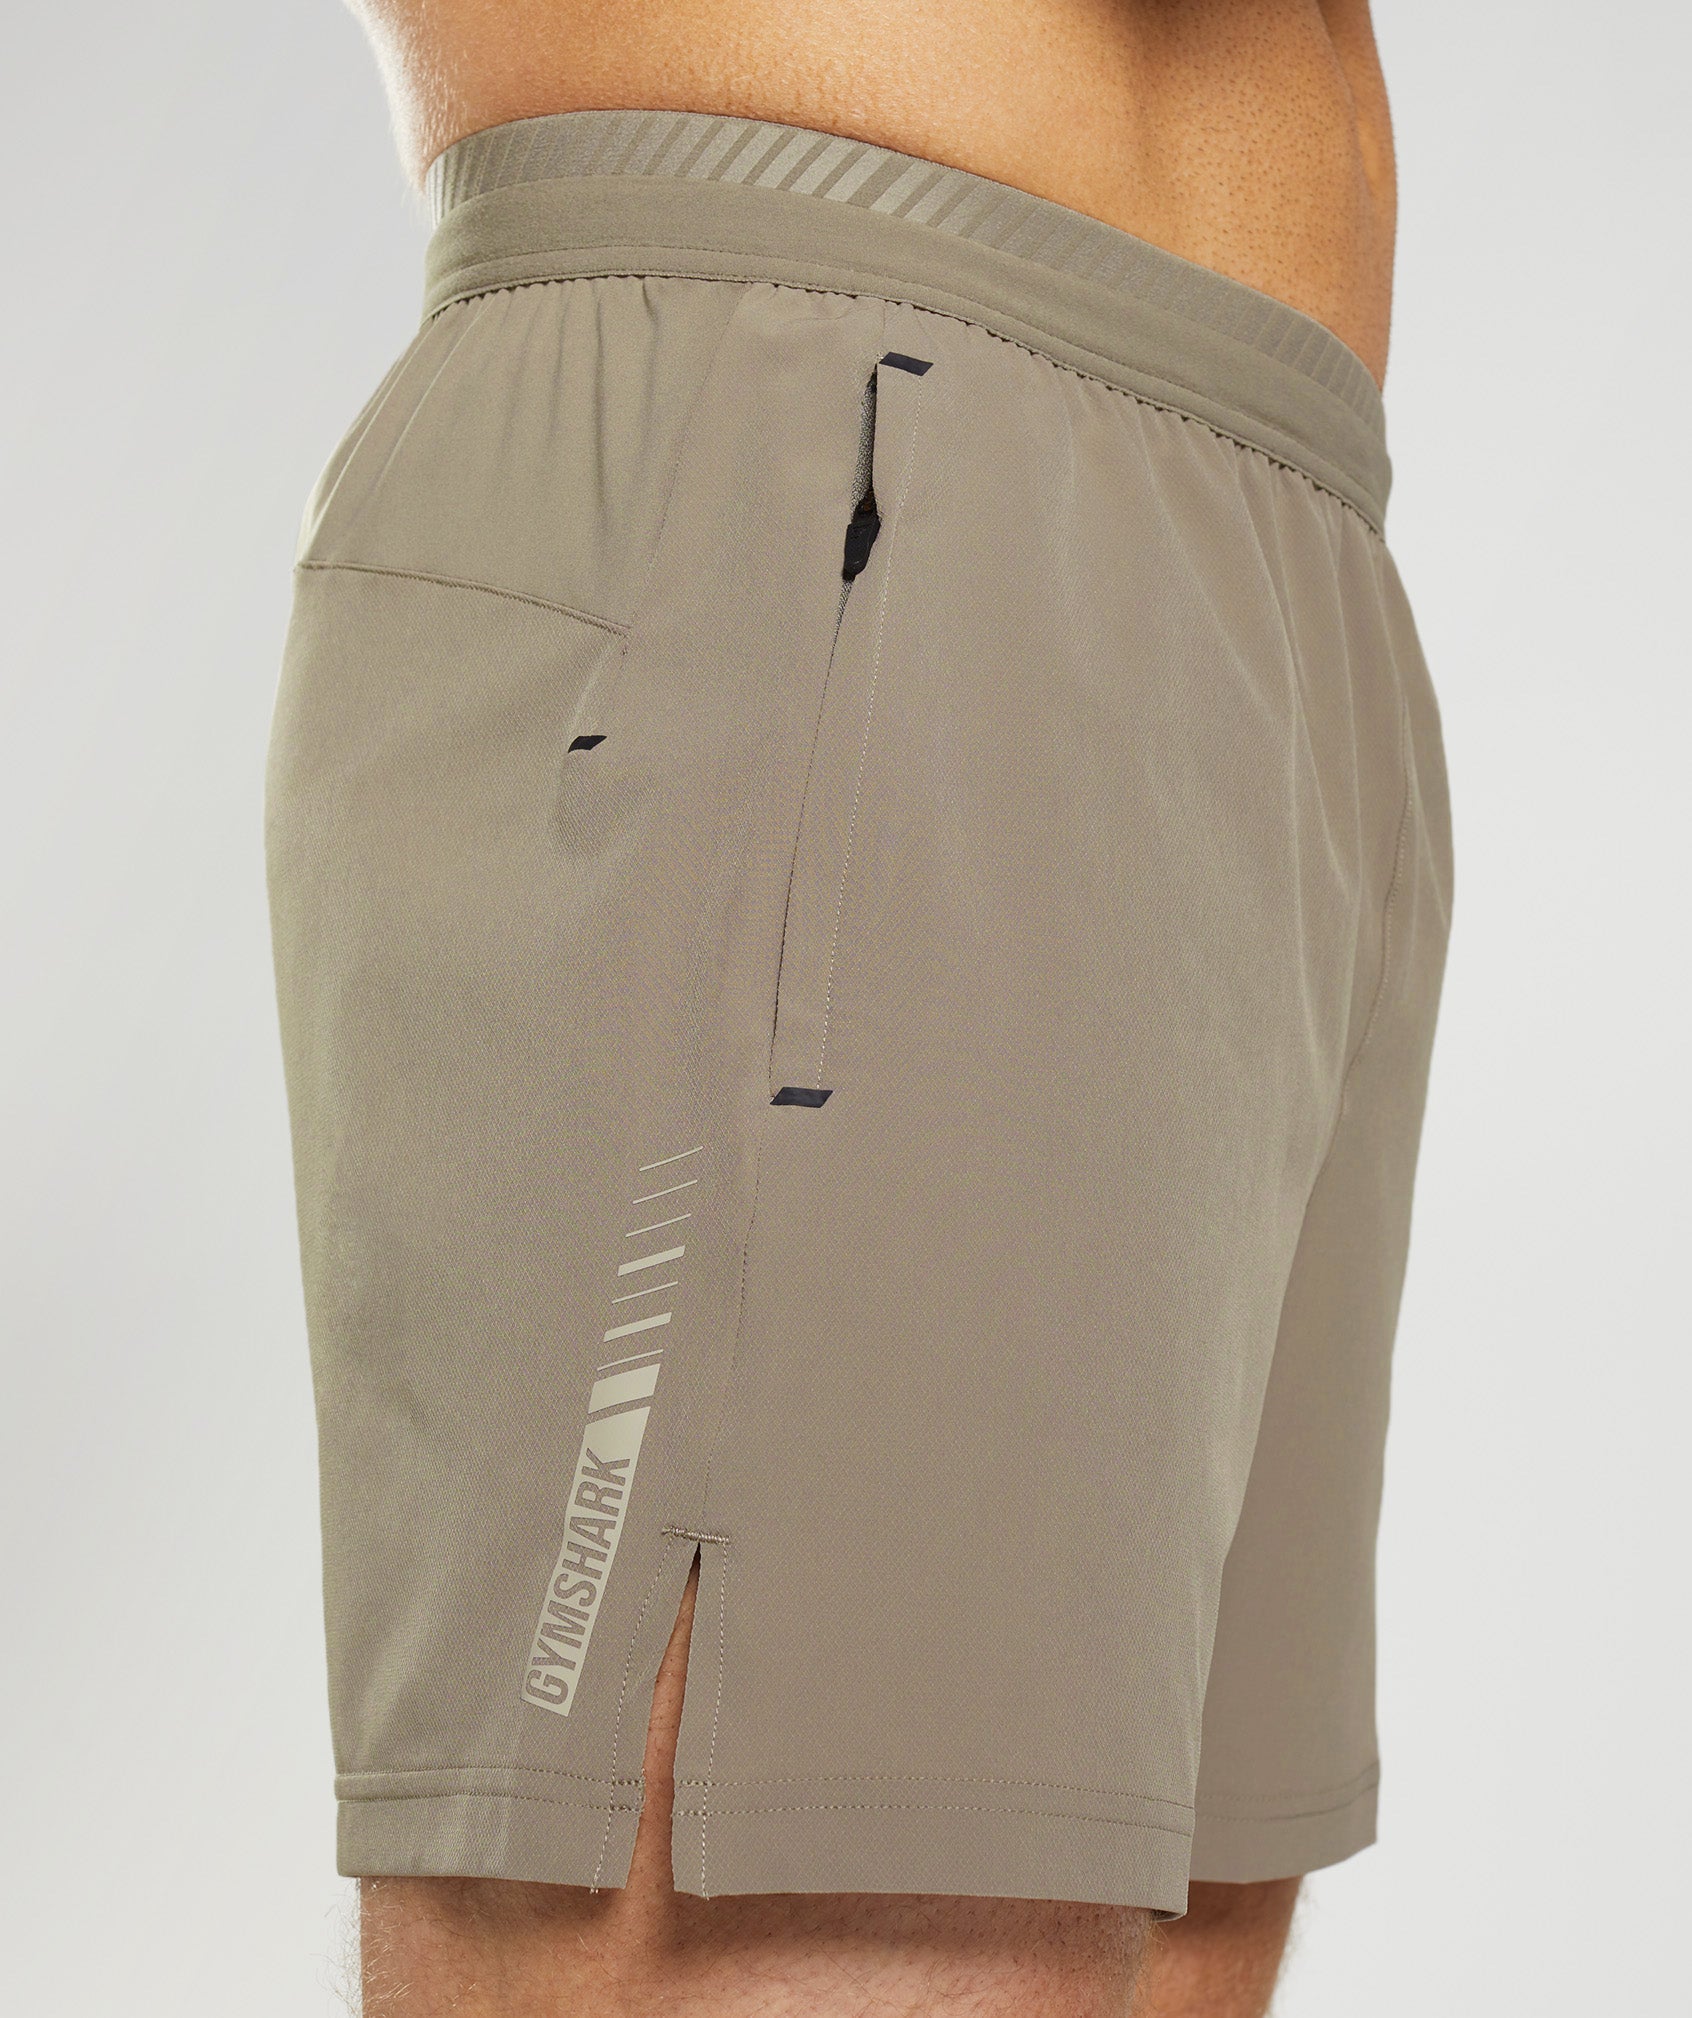 Apex 5" Hybrid Shorts in Earthy Brown - view 6